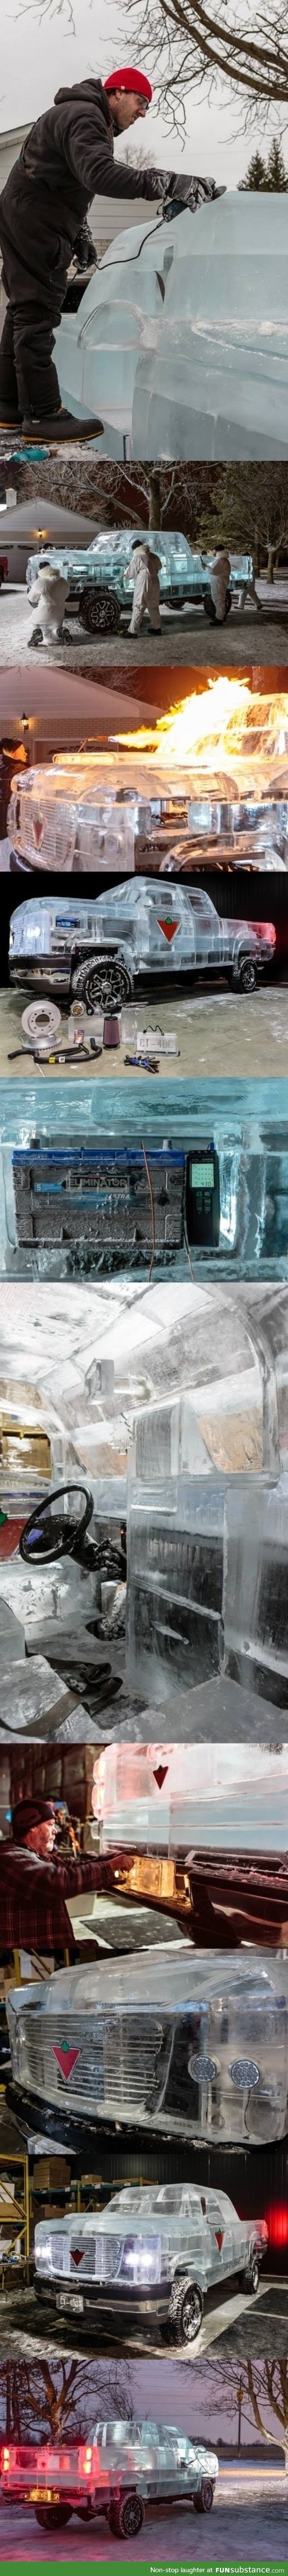 Truck made of ice